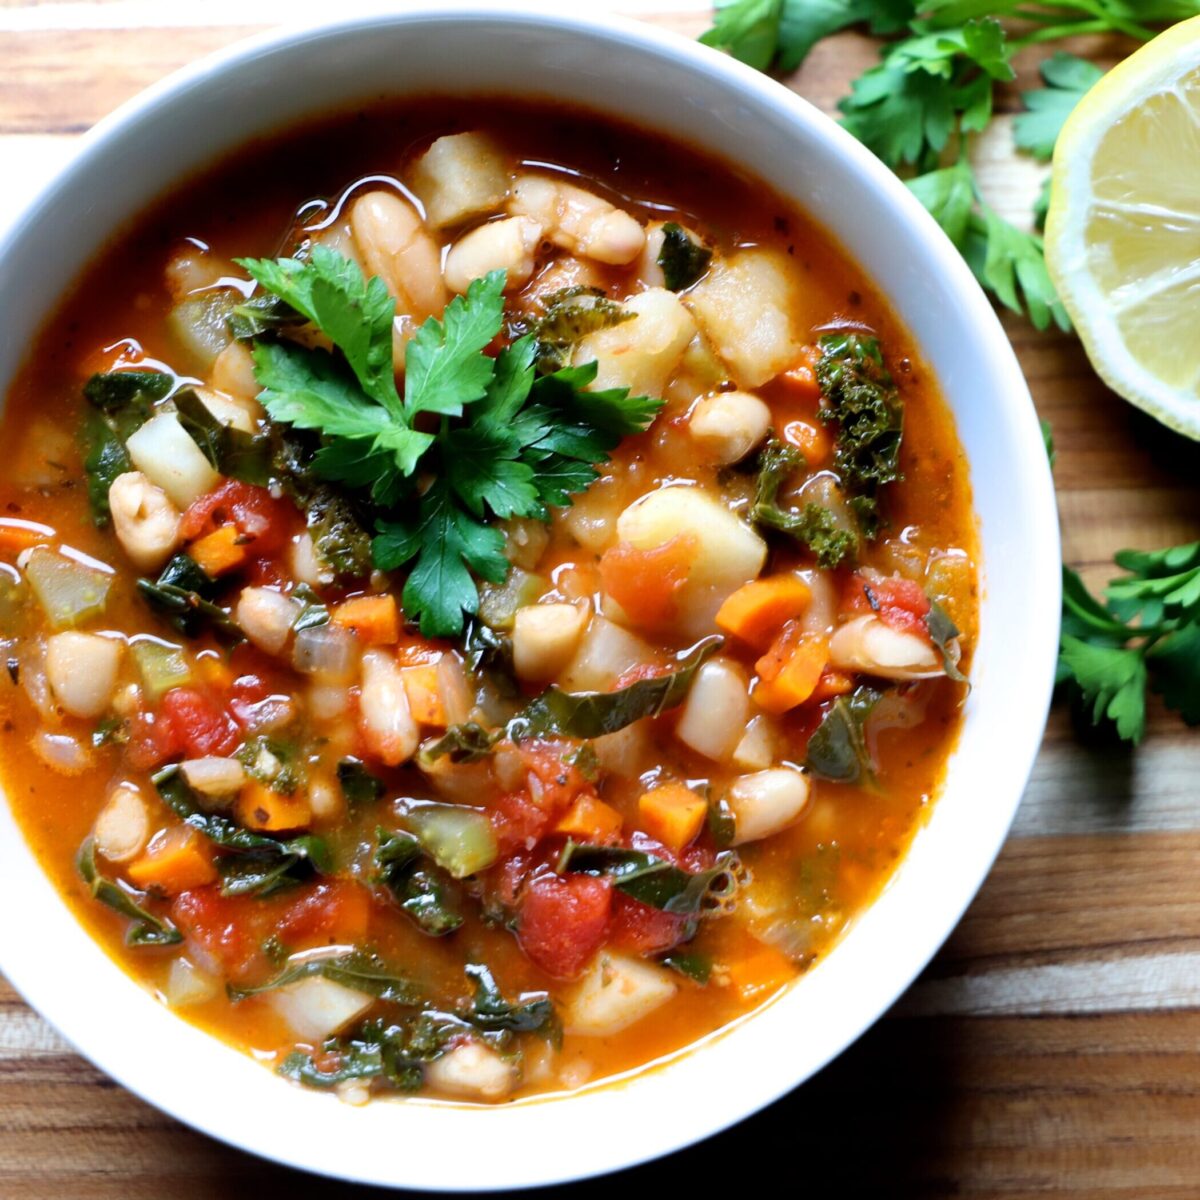 Tuscan Kale and White Bean Soup in a Bowl